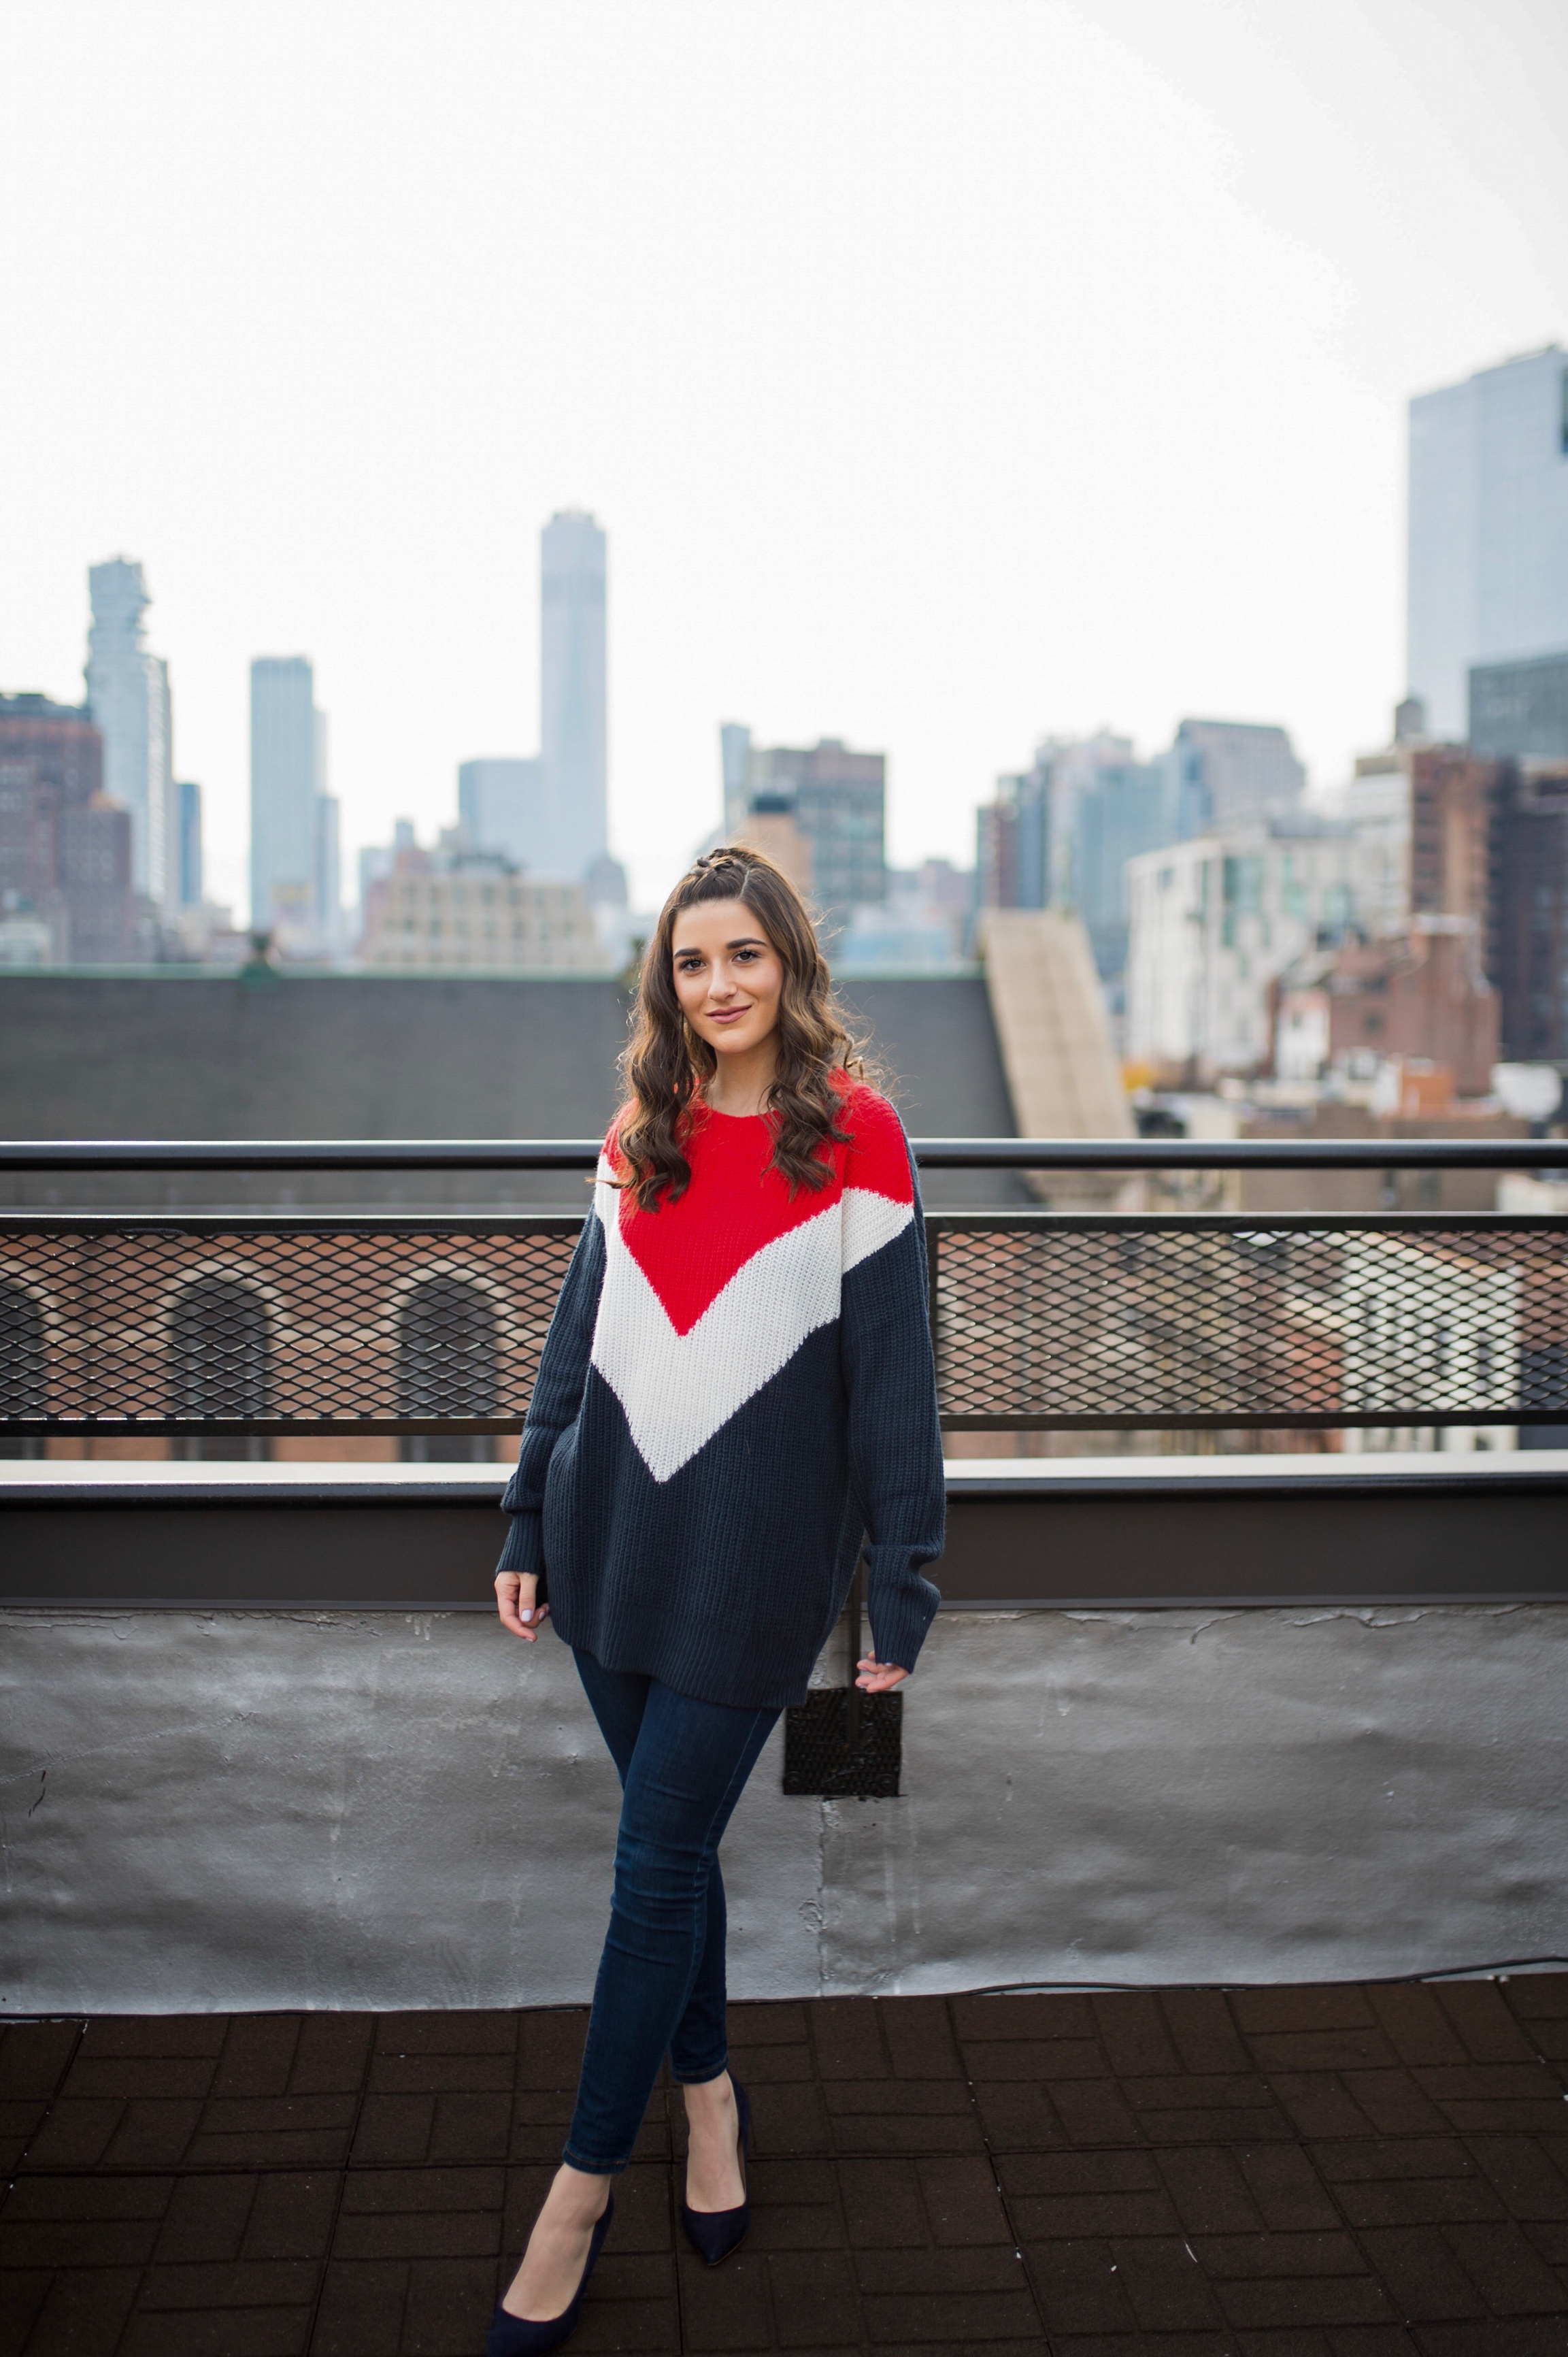 Advice For The Micro-influencer Oversized Sweater Navy Heels Esther Santer Fashion Blog NYC Street Style Blogger Outfit OOTD Trendy Shopping Subtle Balayage Highlights Hair Jeans Sally Hershberger Girl Chic How To Wear Winter Women Red White Blue 2018.jpg